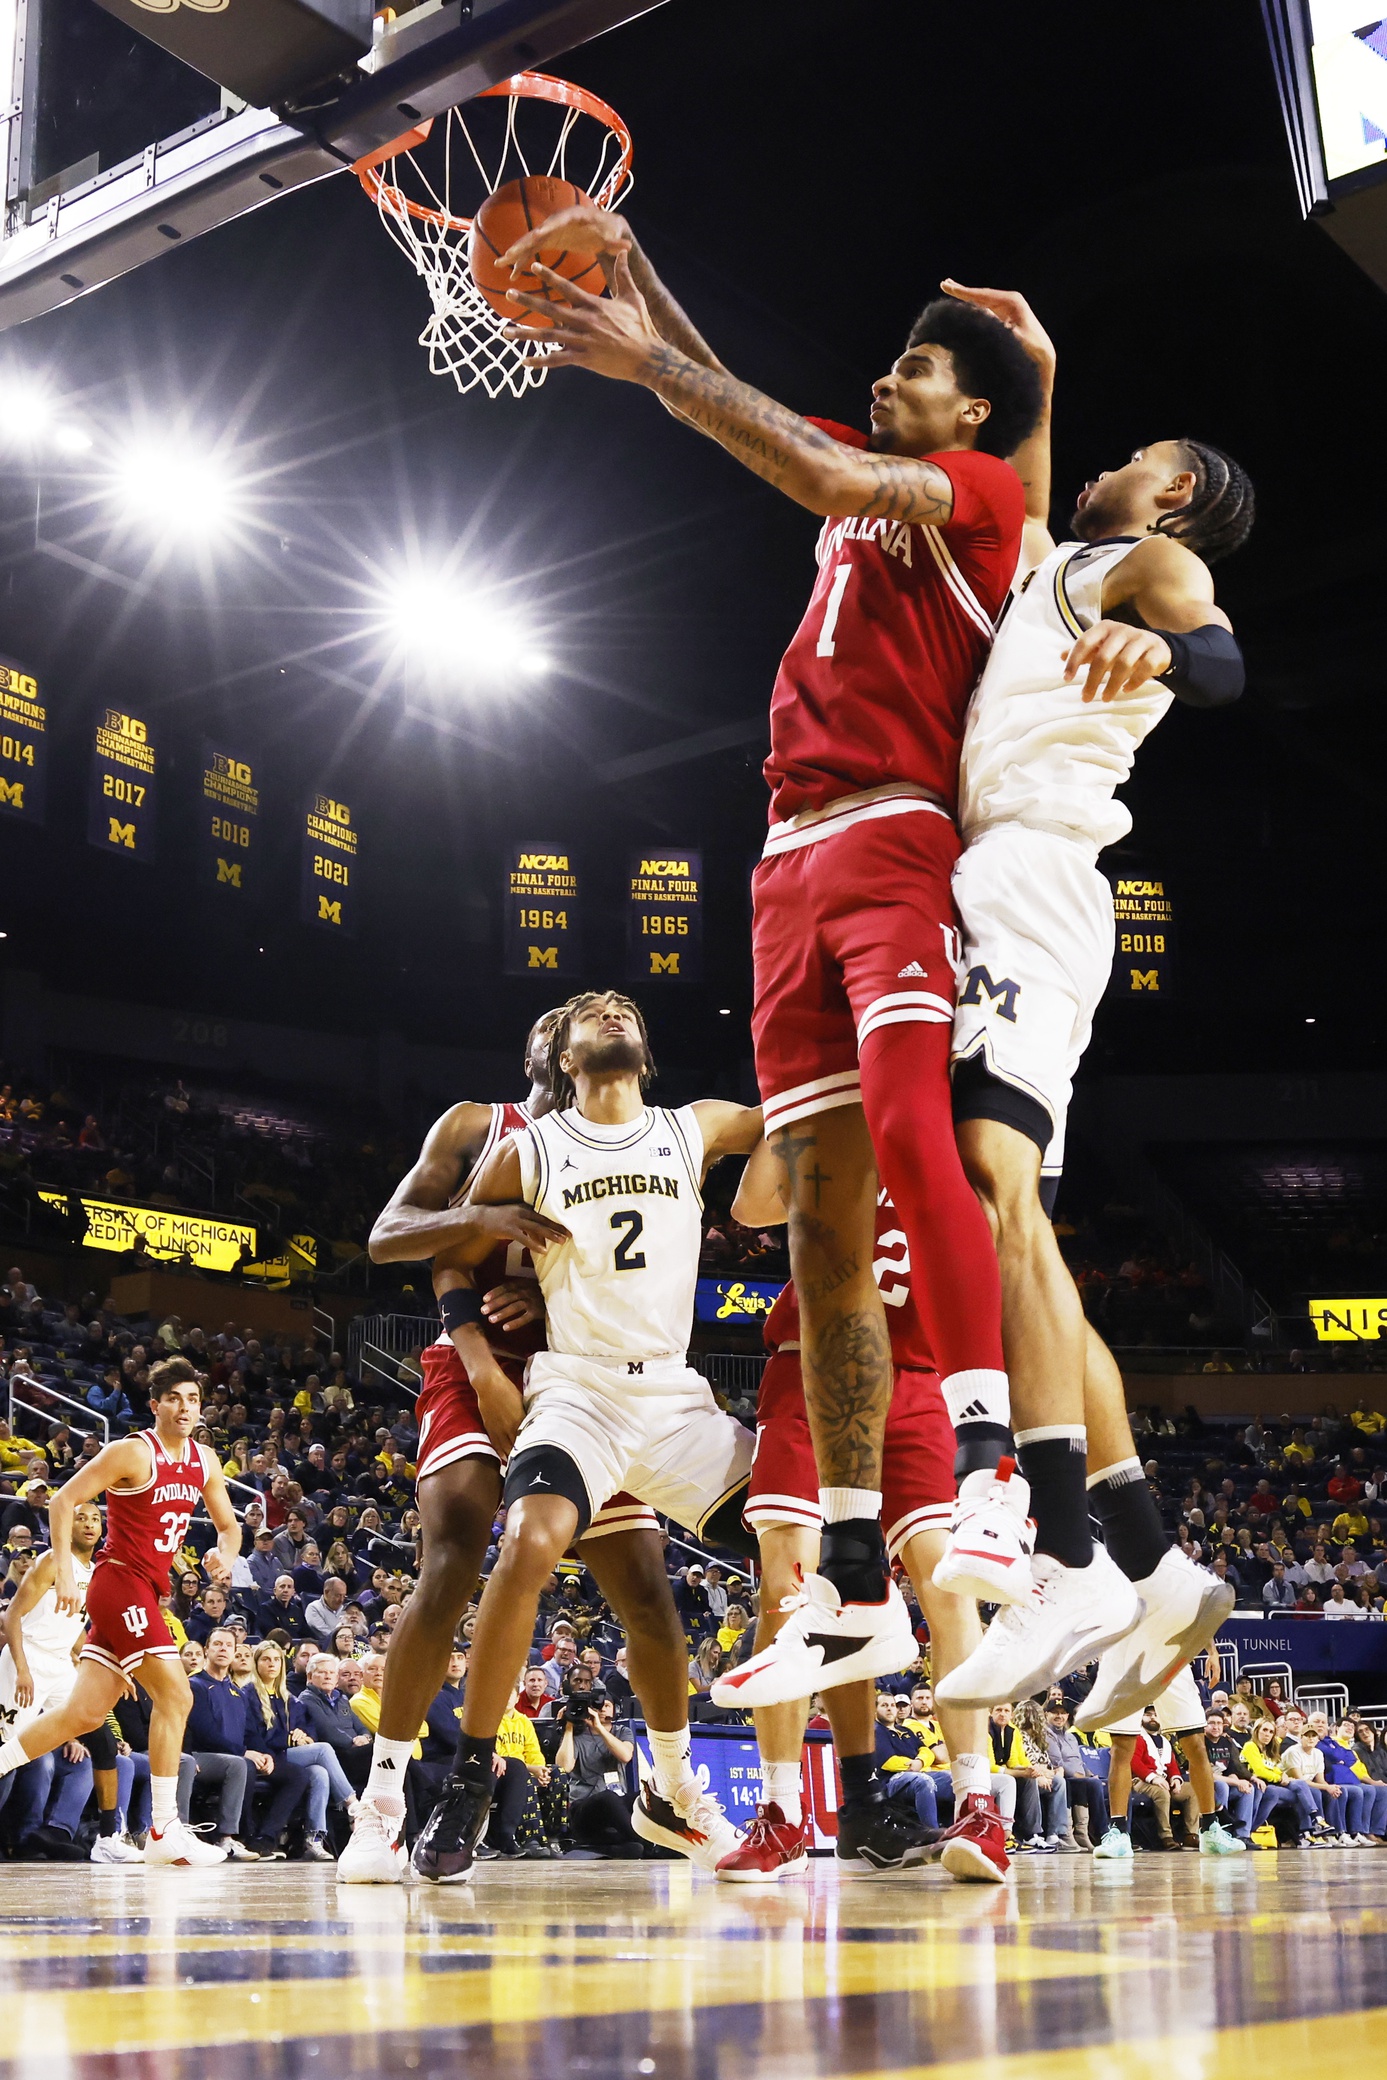 Indiana center Kel'el Ware (1) grabs the rebound in the first half against the Michigan Wolverines.